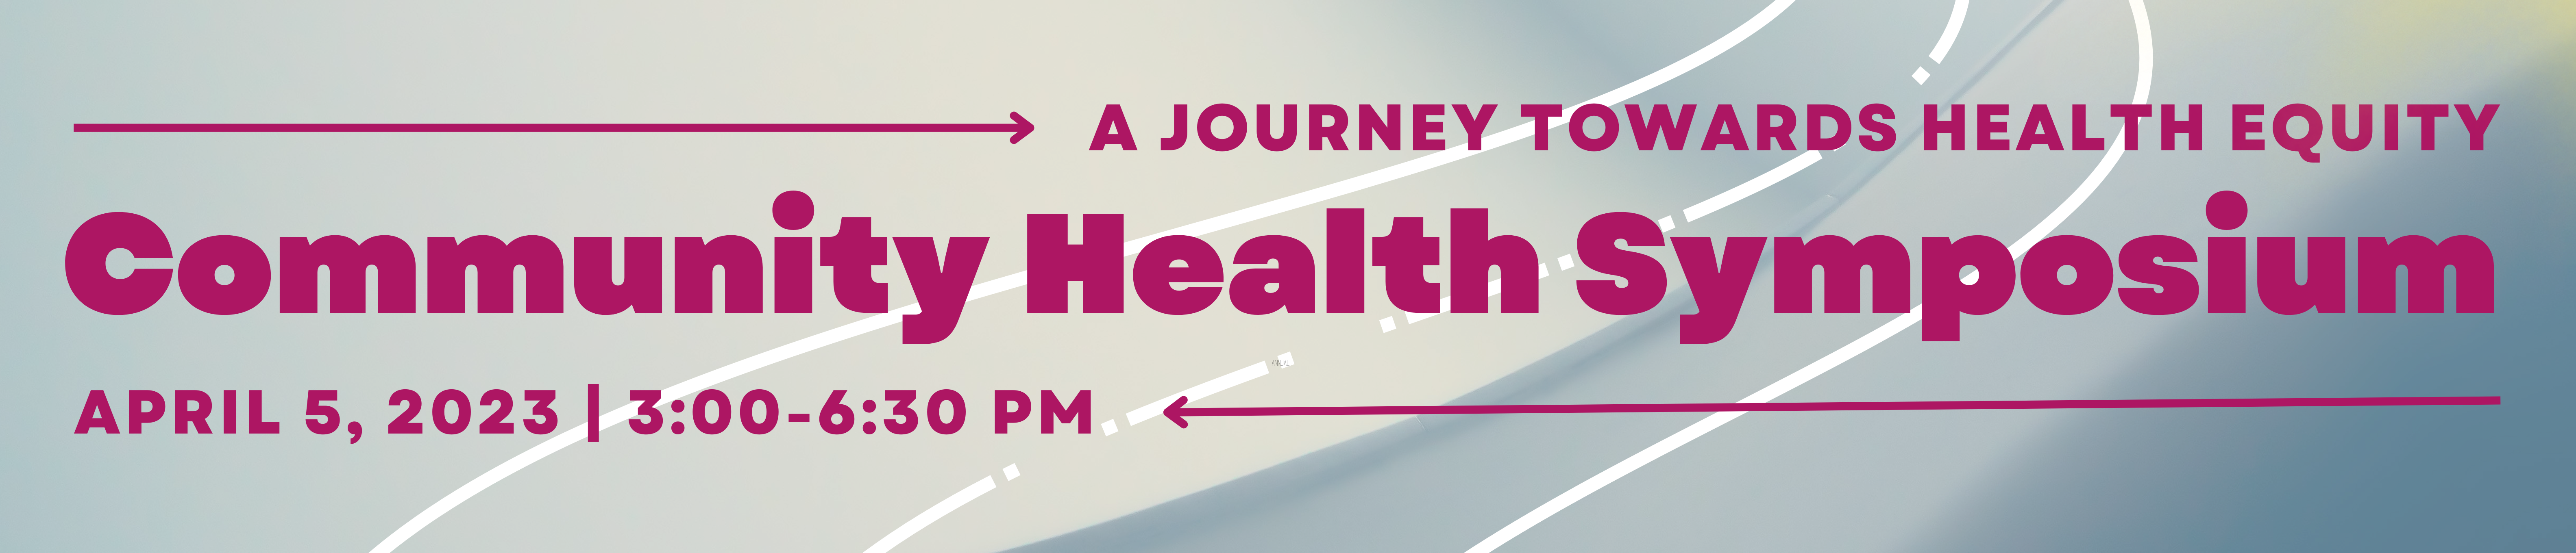 21st Annual Community Health Symposium: A Journey Towards Health Equity Banner